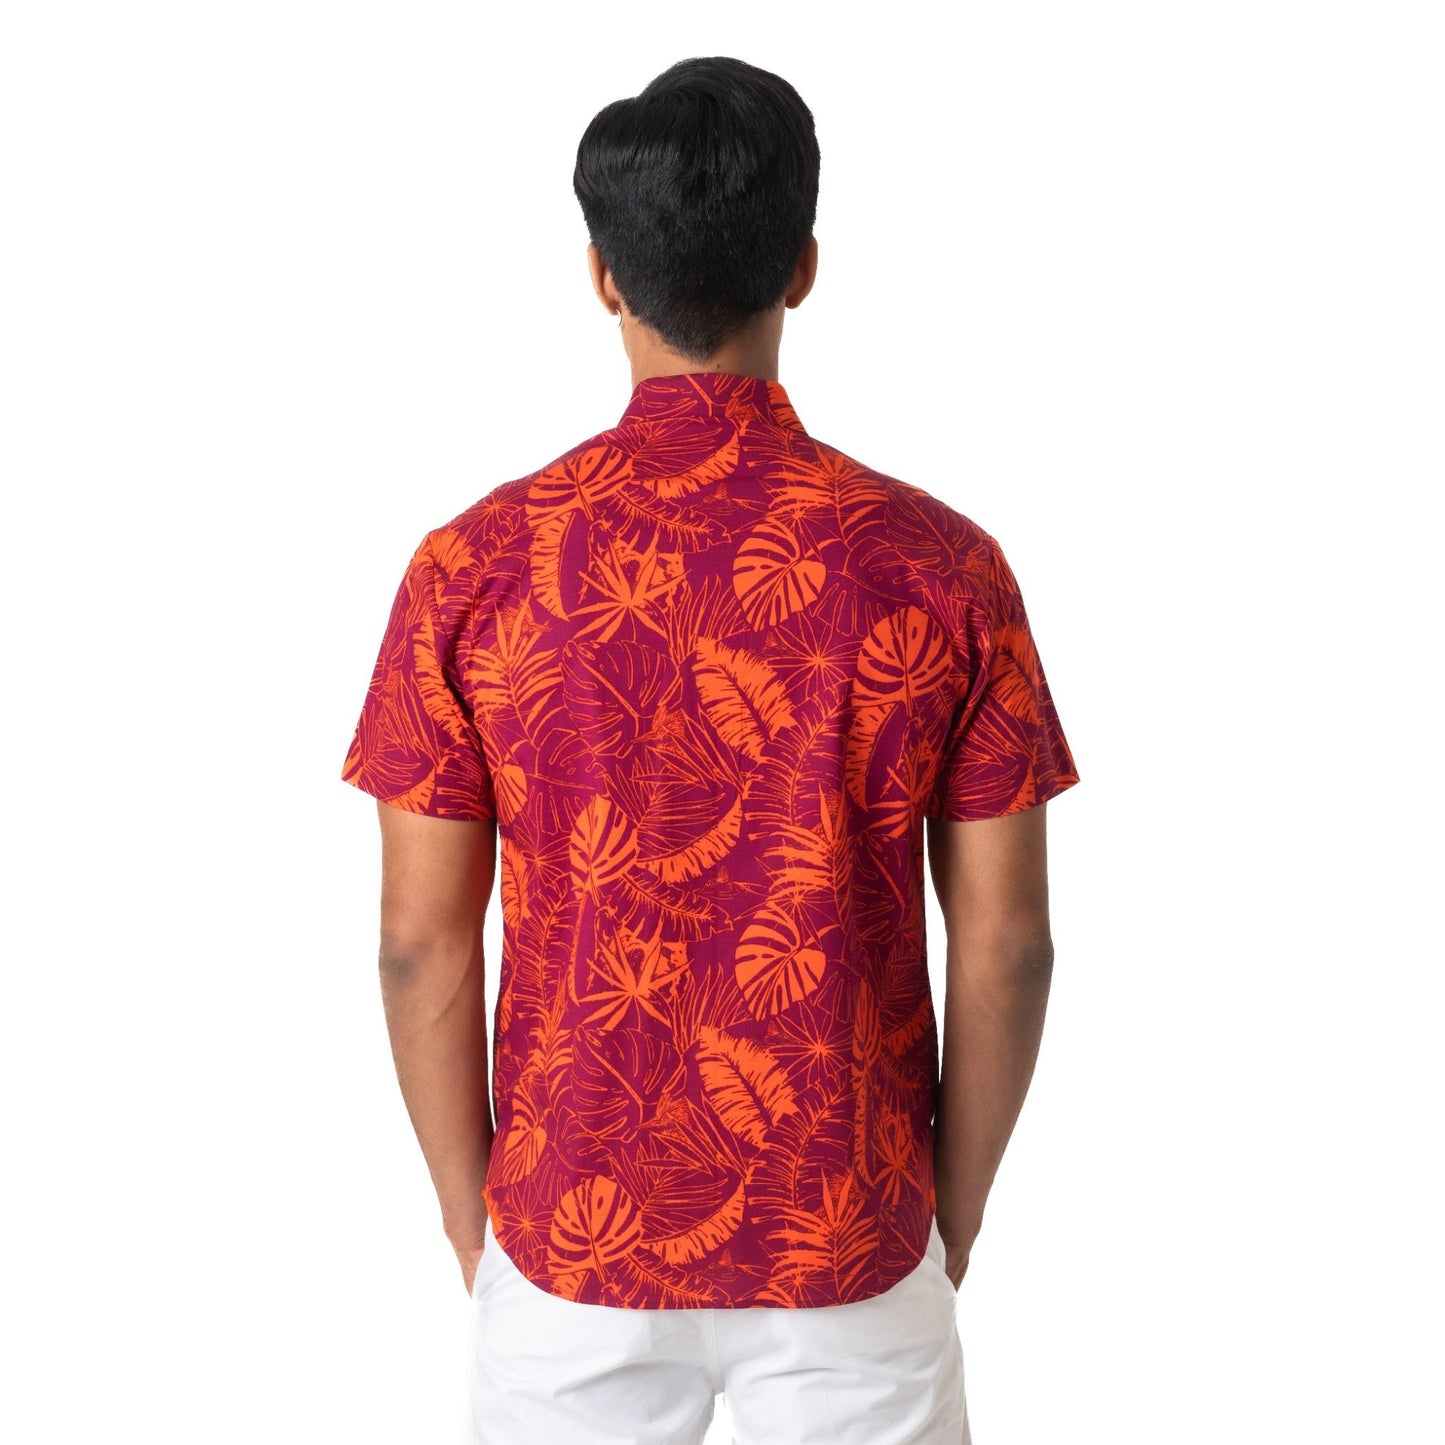 Tropical printed short sleeve shirt with regimental tape on under placket and pocket in print at chest